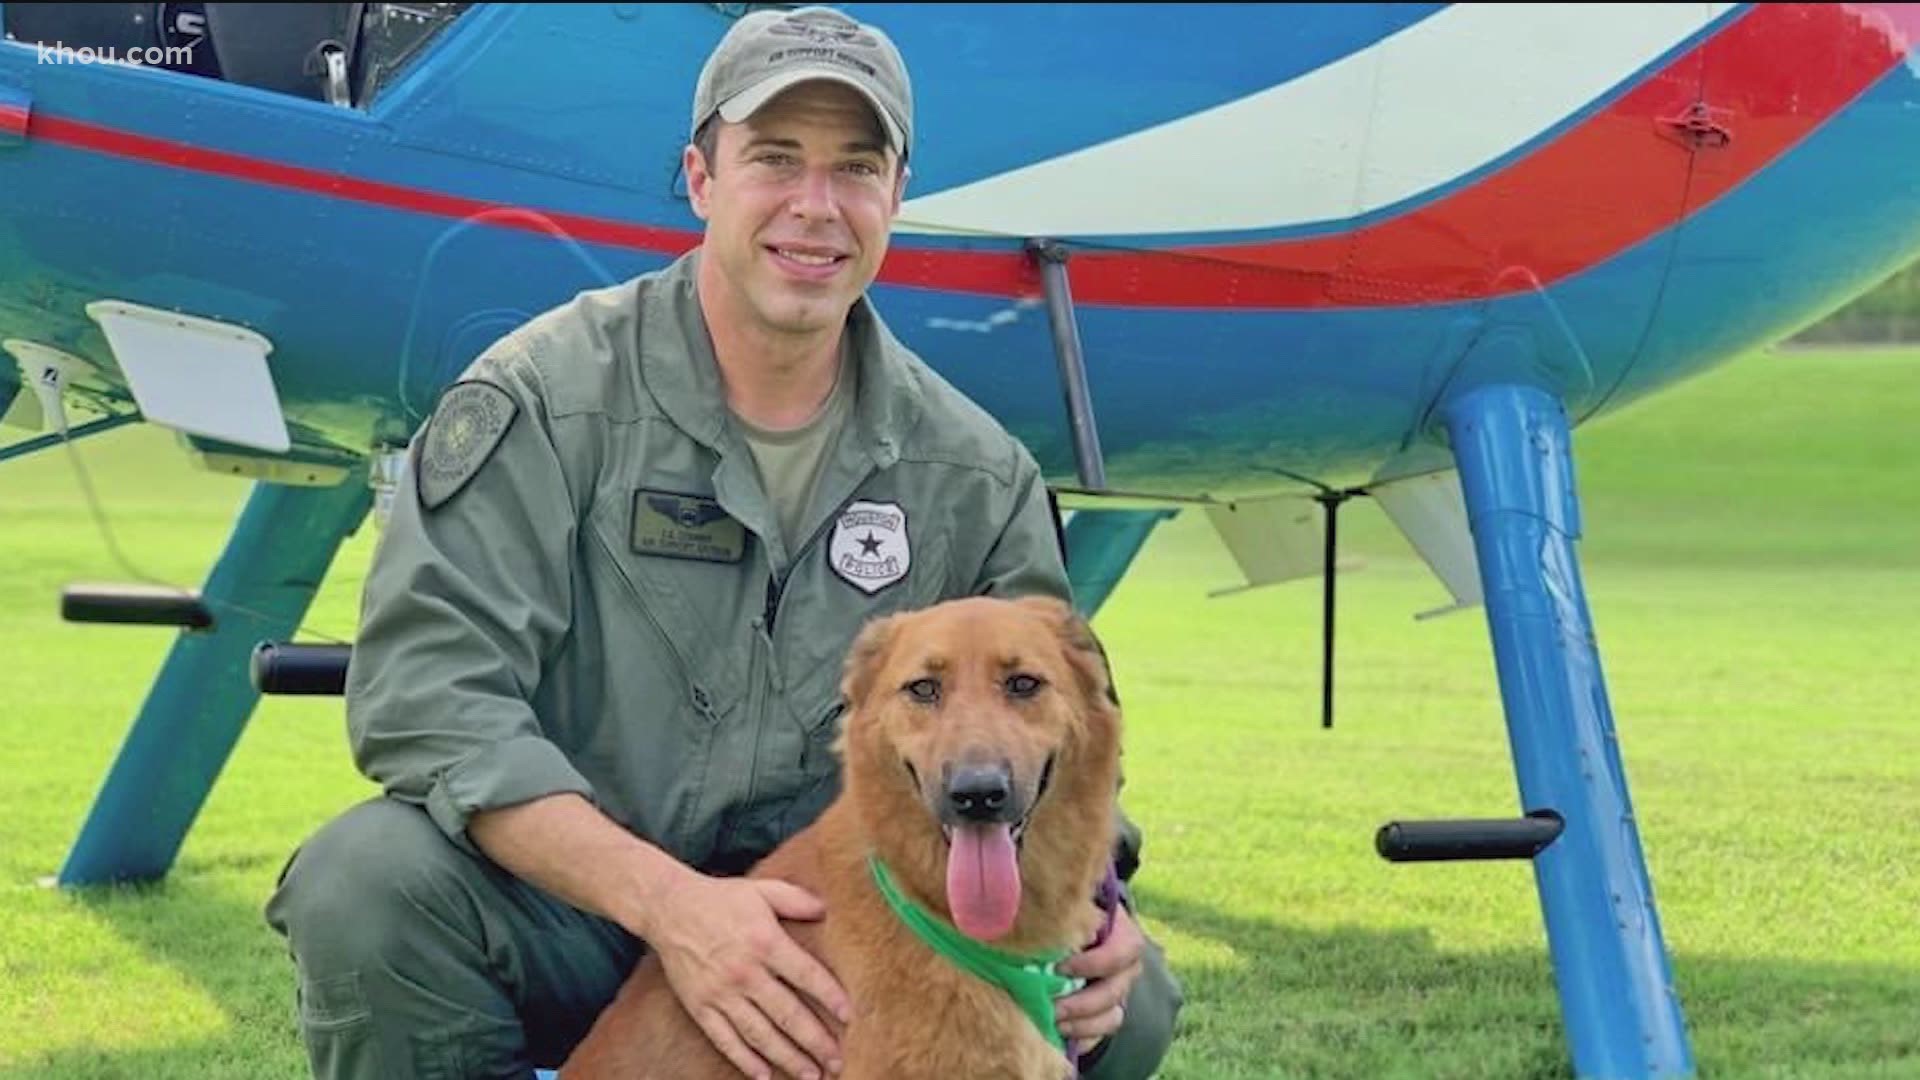 Houston Police Chief Art Acevedo said the pilot injured in a deadly crash Saturday, 35-year-old Chase Cormier, is recovering after undergoing surgery.